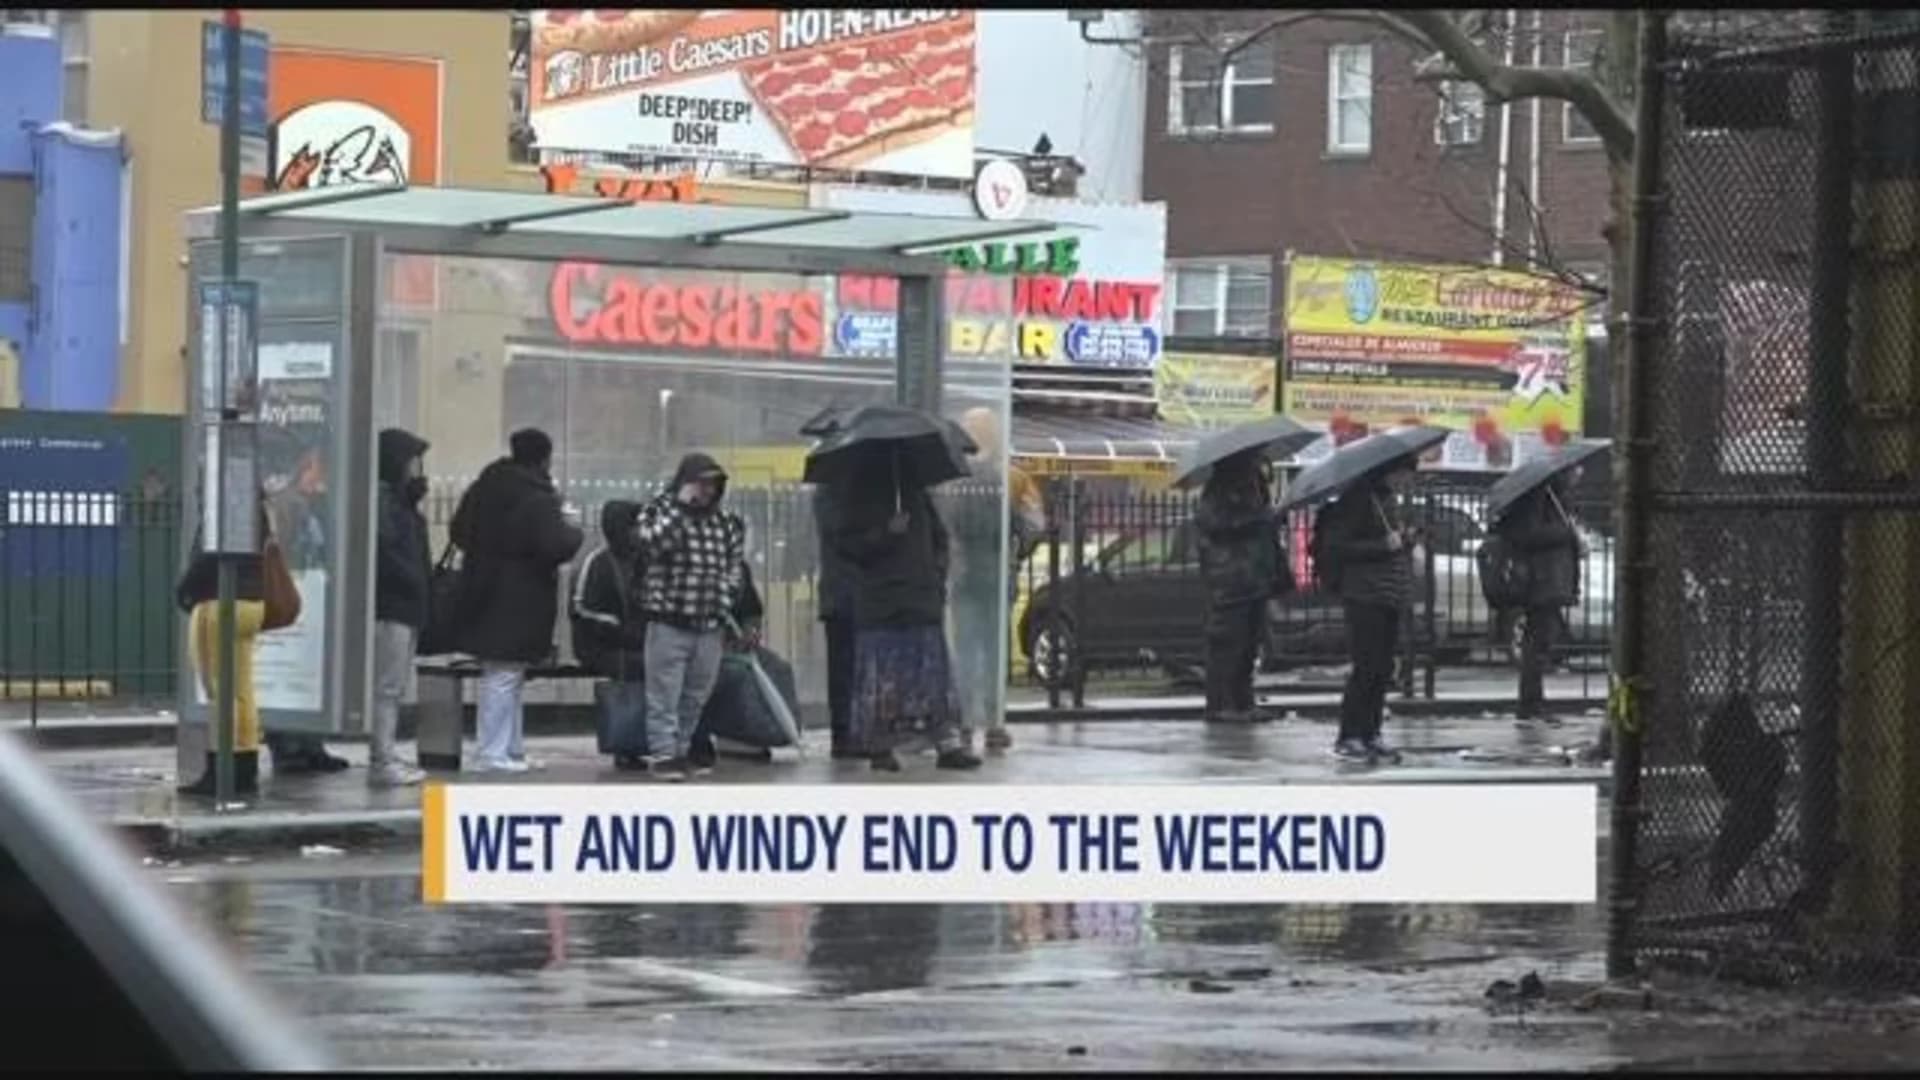 Bronx sees damp, windy end to weekend